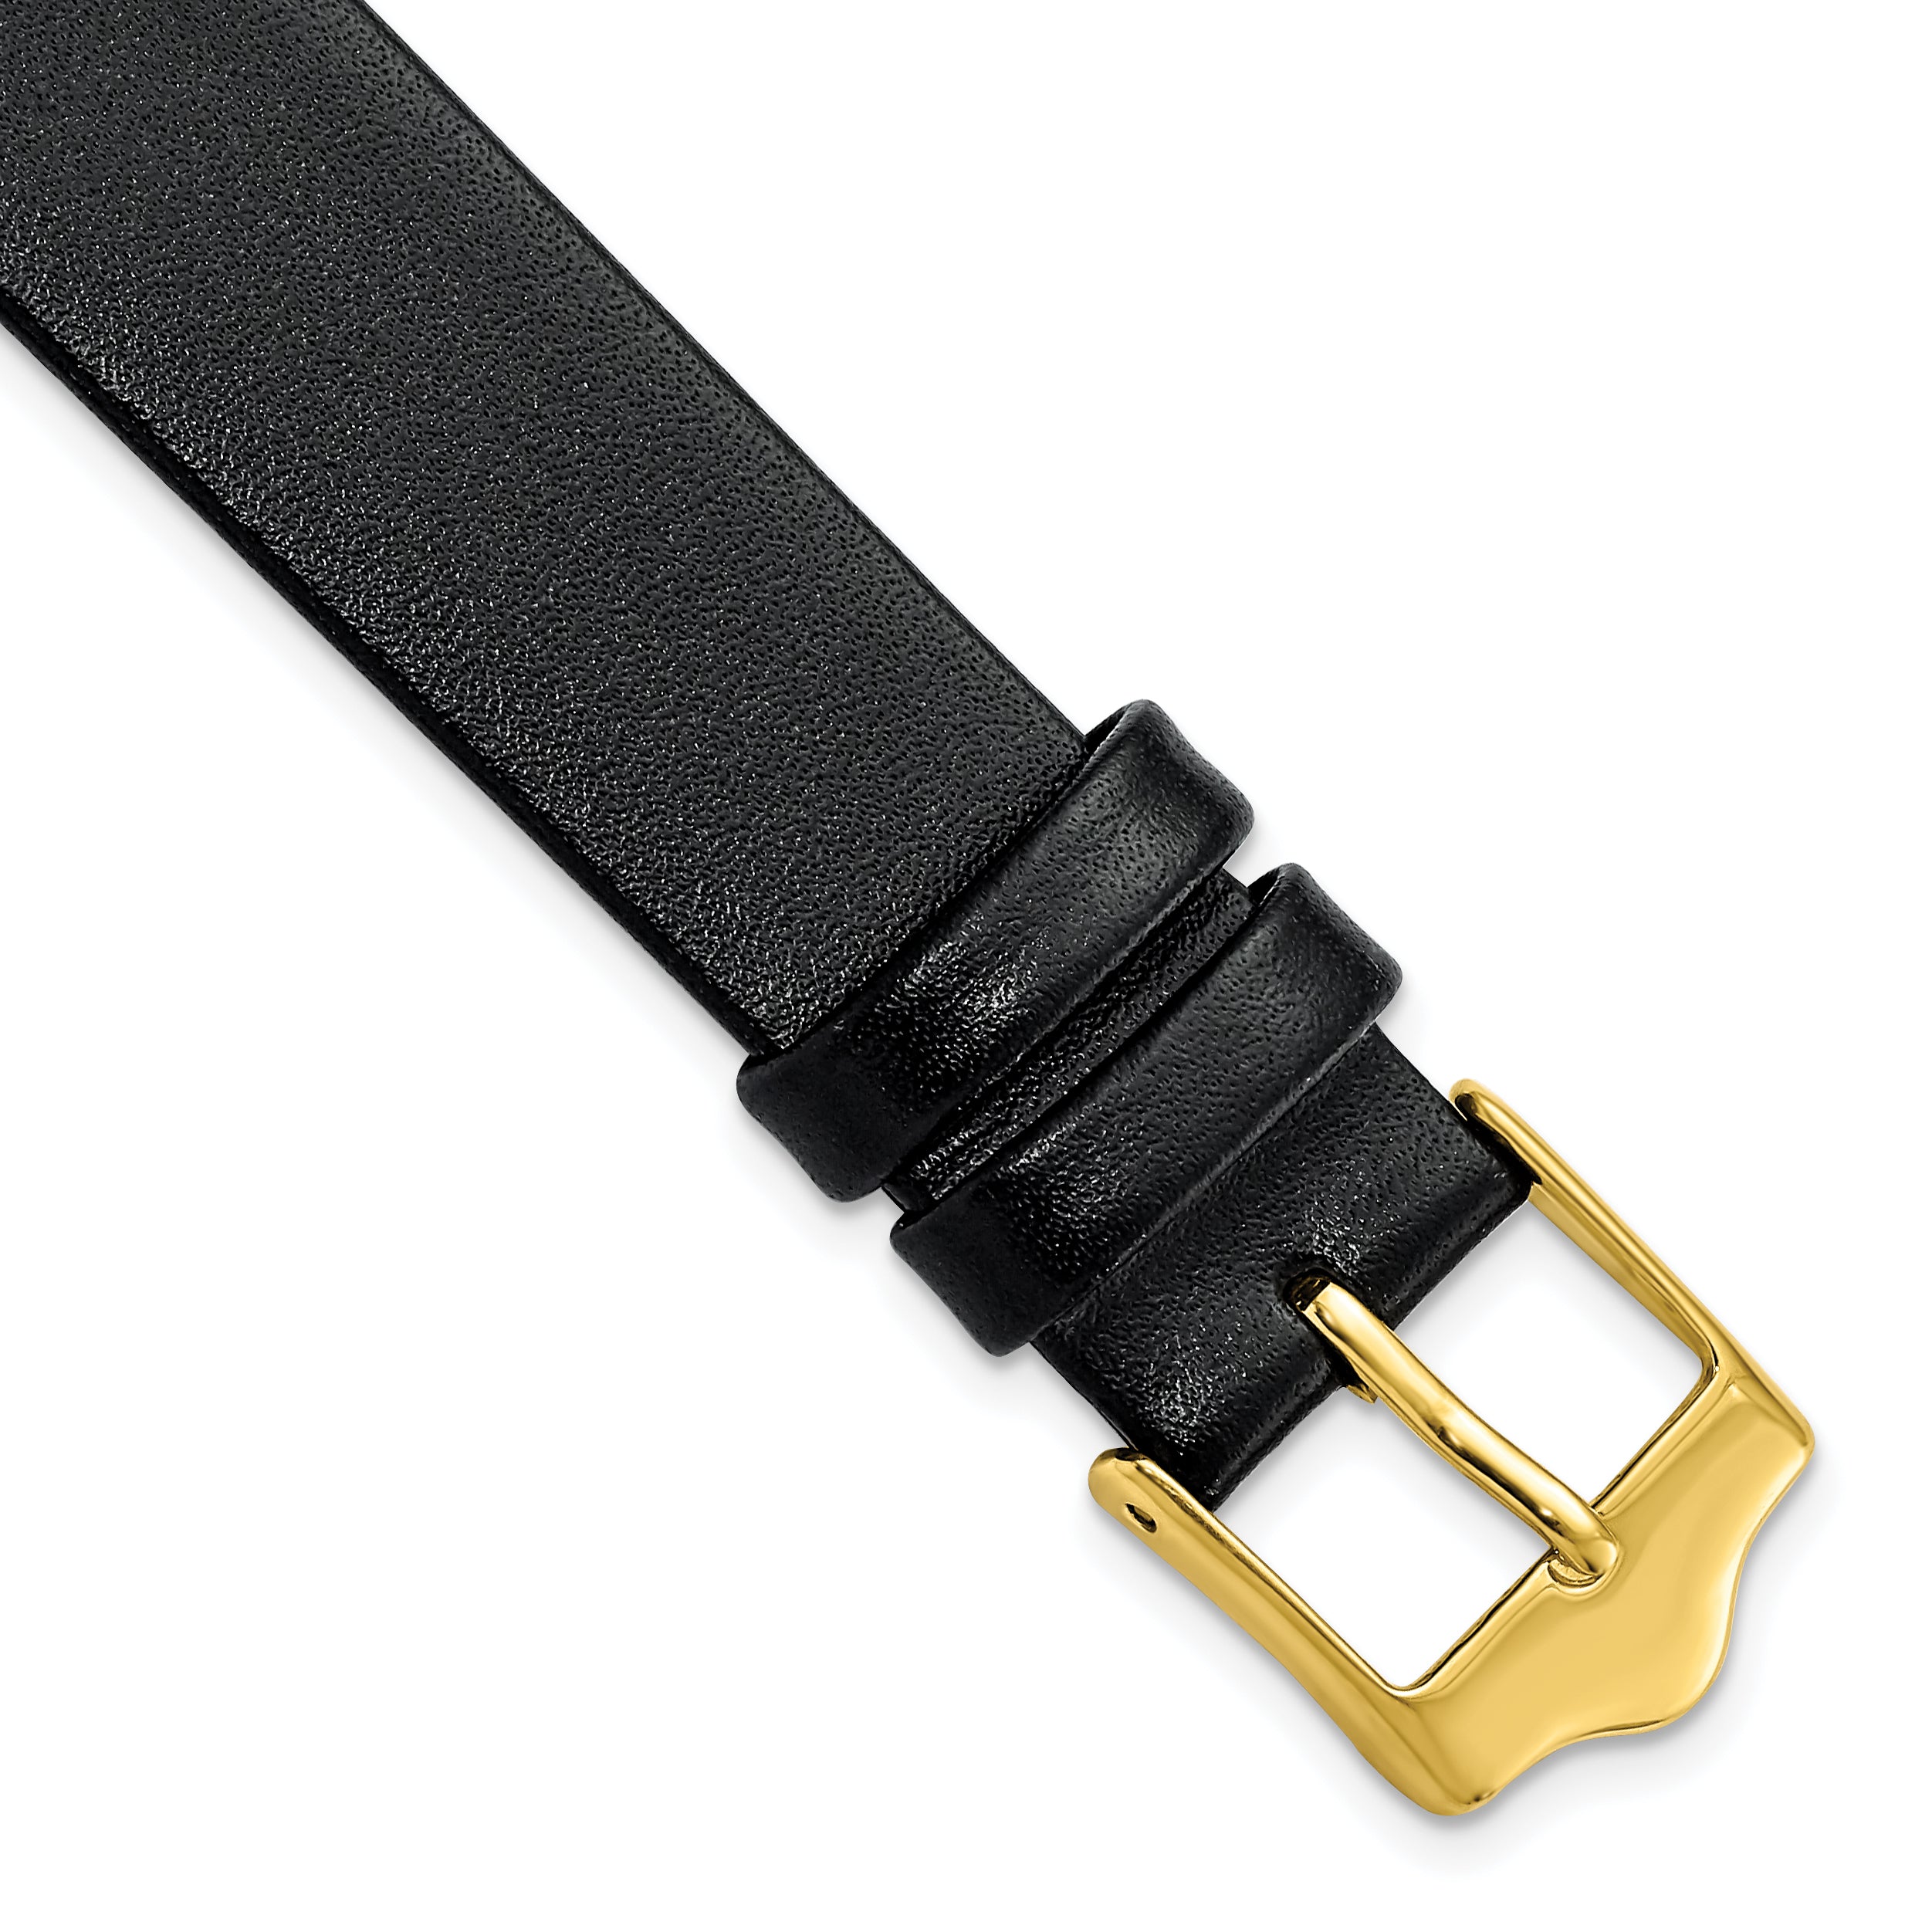 DeBeer 15mm Black Smooth Flat Leather with Gold-tone Buckle 7.5 inch Watch Band